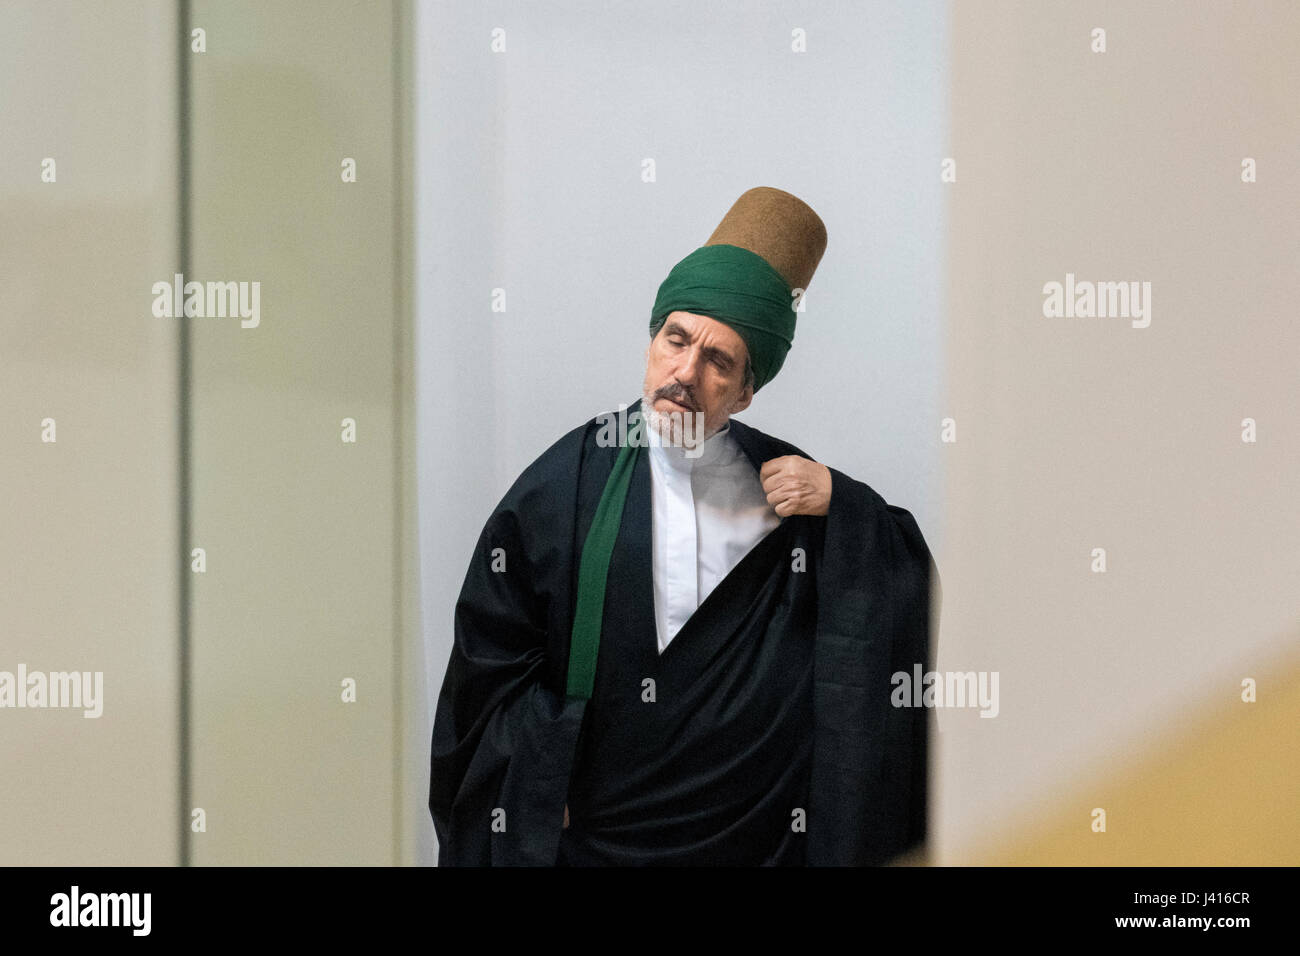 Yakup Koyuncu, known as Yakup Baba (an honorific name meaning father) owns a building in which dervishes belonging to the Helvati Sufi sect gather. Ev Stock Photo